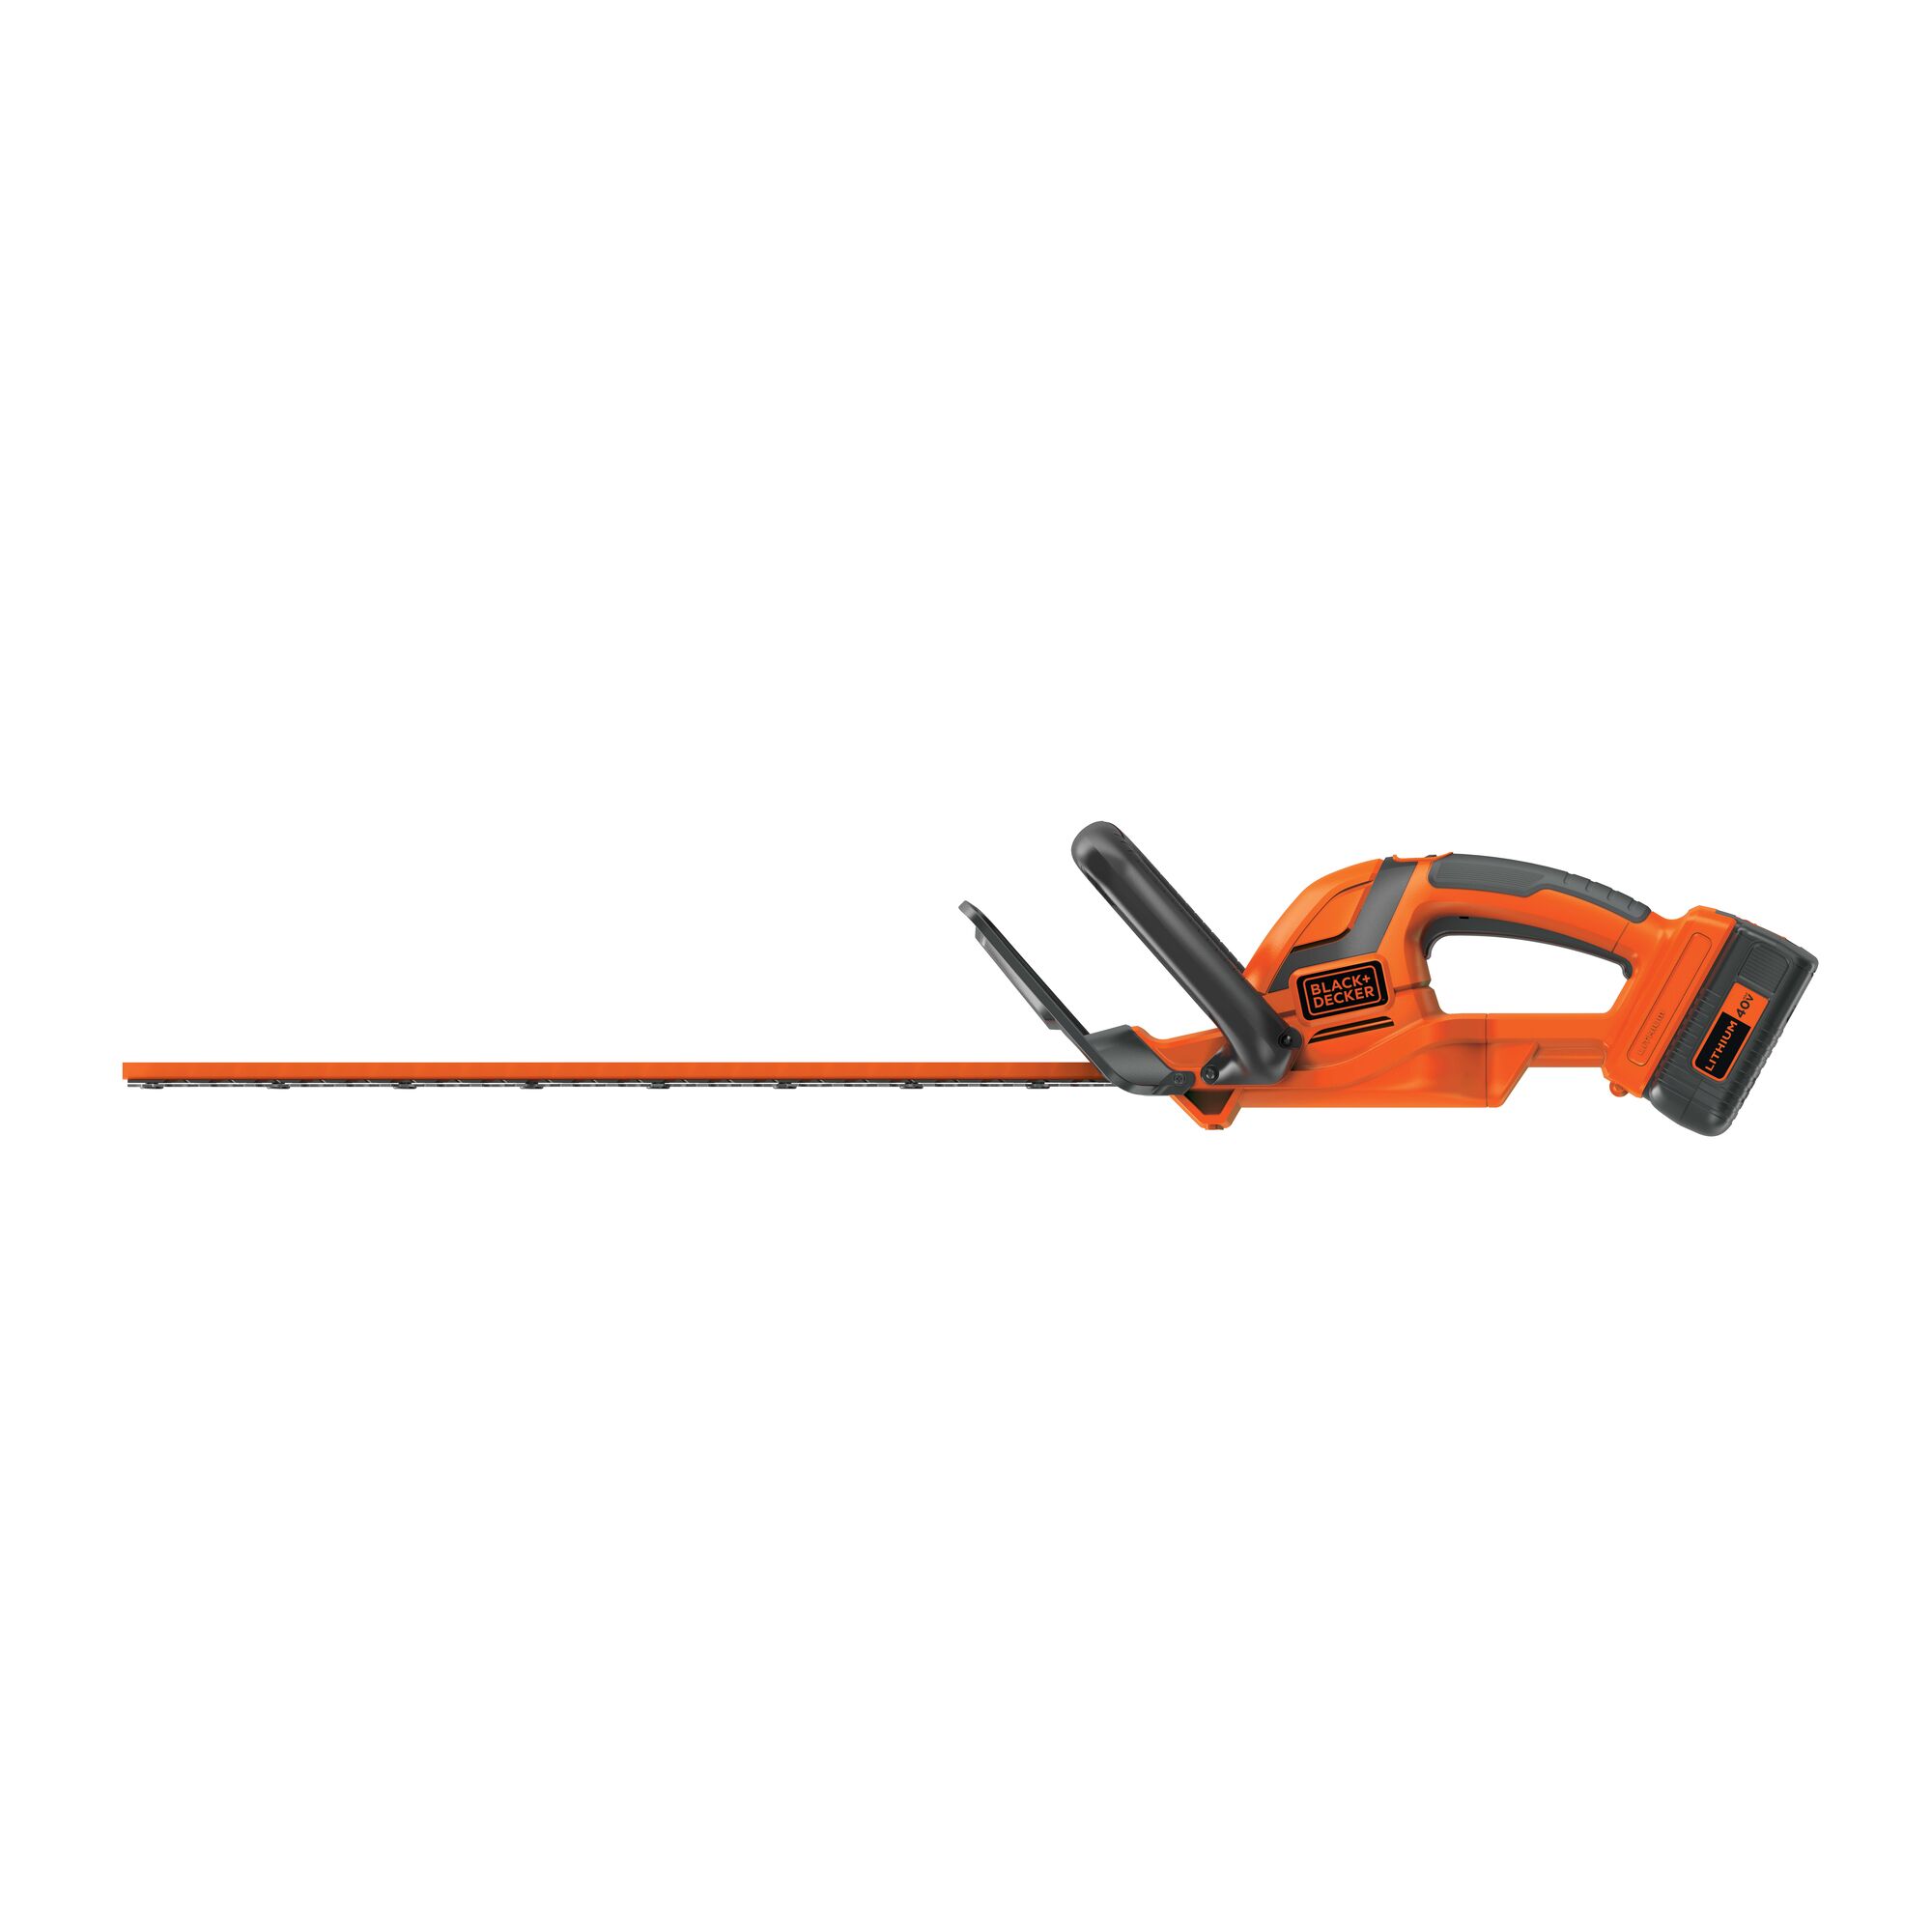 Profile of 22 Inch 40 Volt Max Hedge Trimmer on white background.